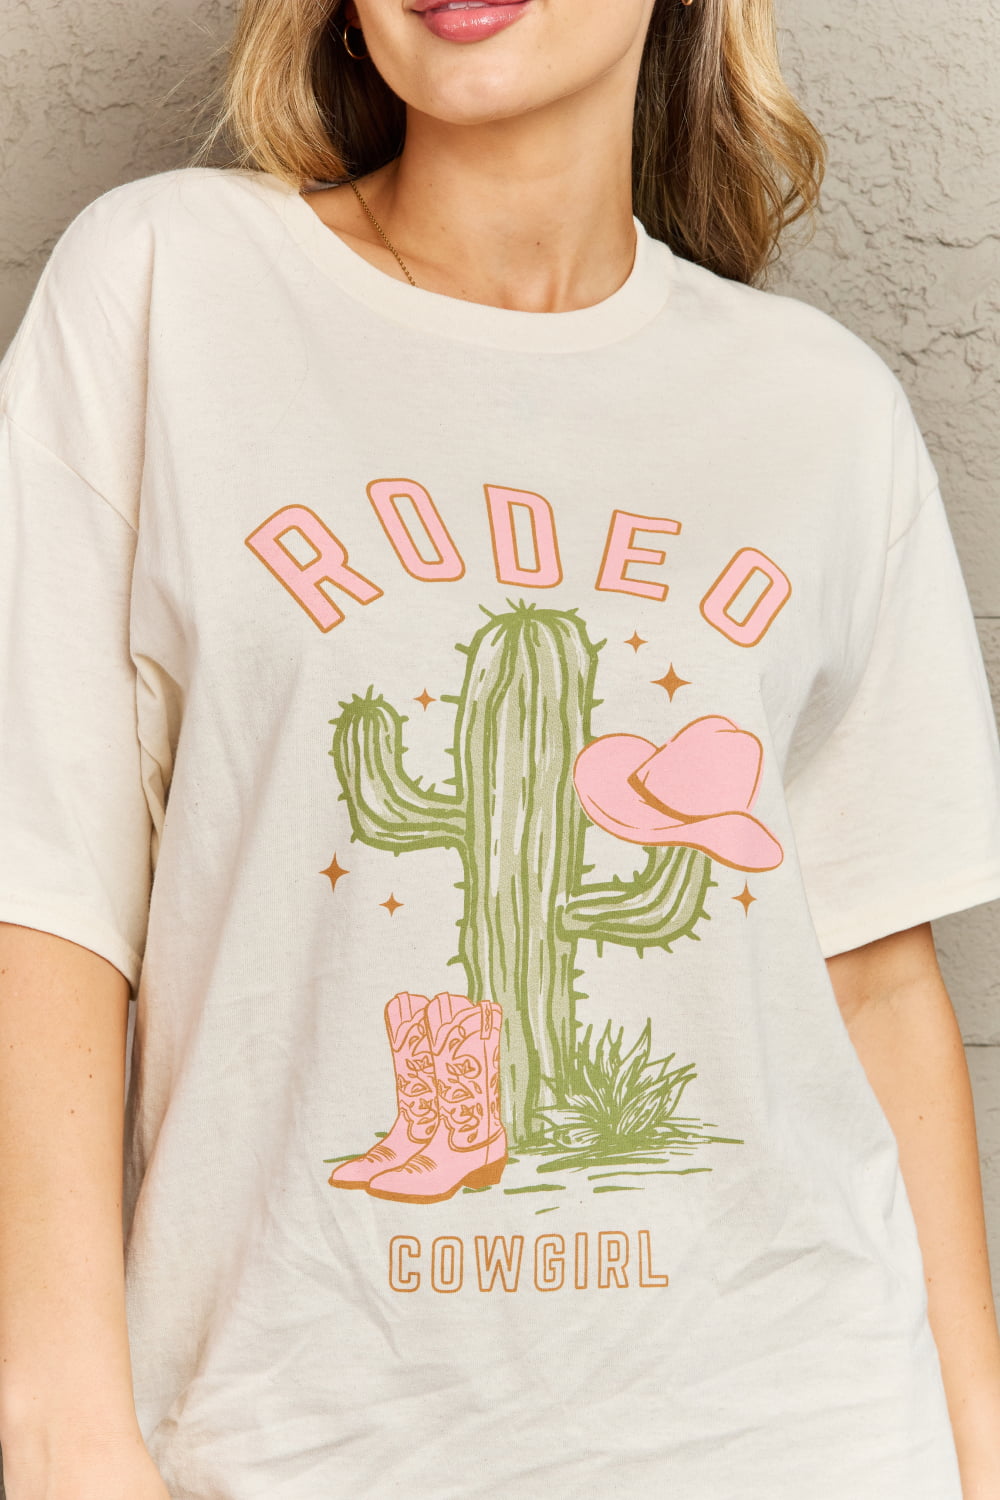 "Rodeo Cowgirl" Graphic T-Shirt